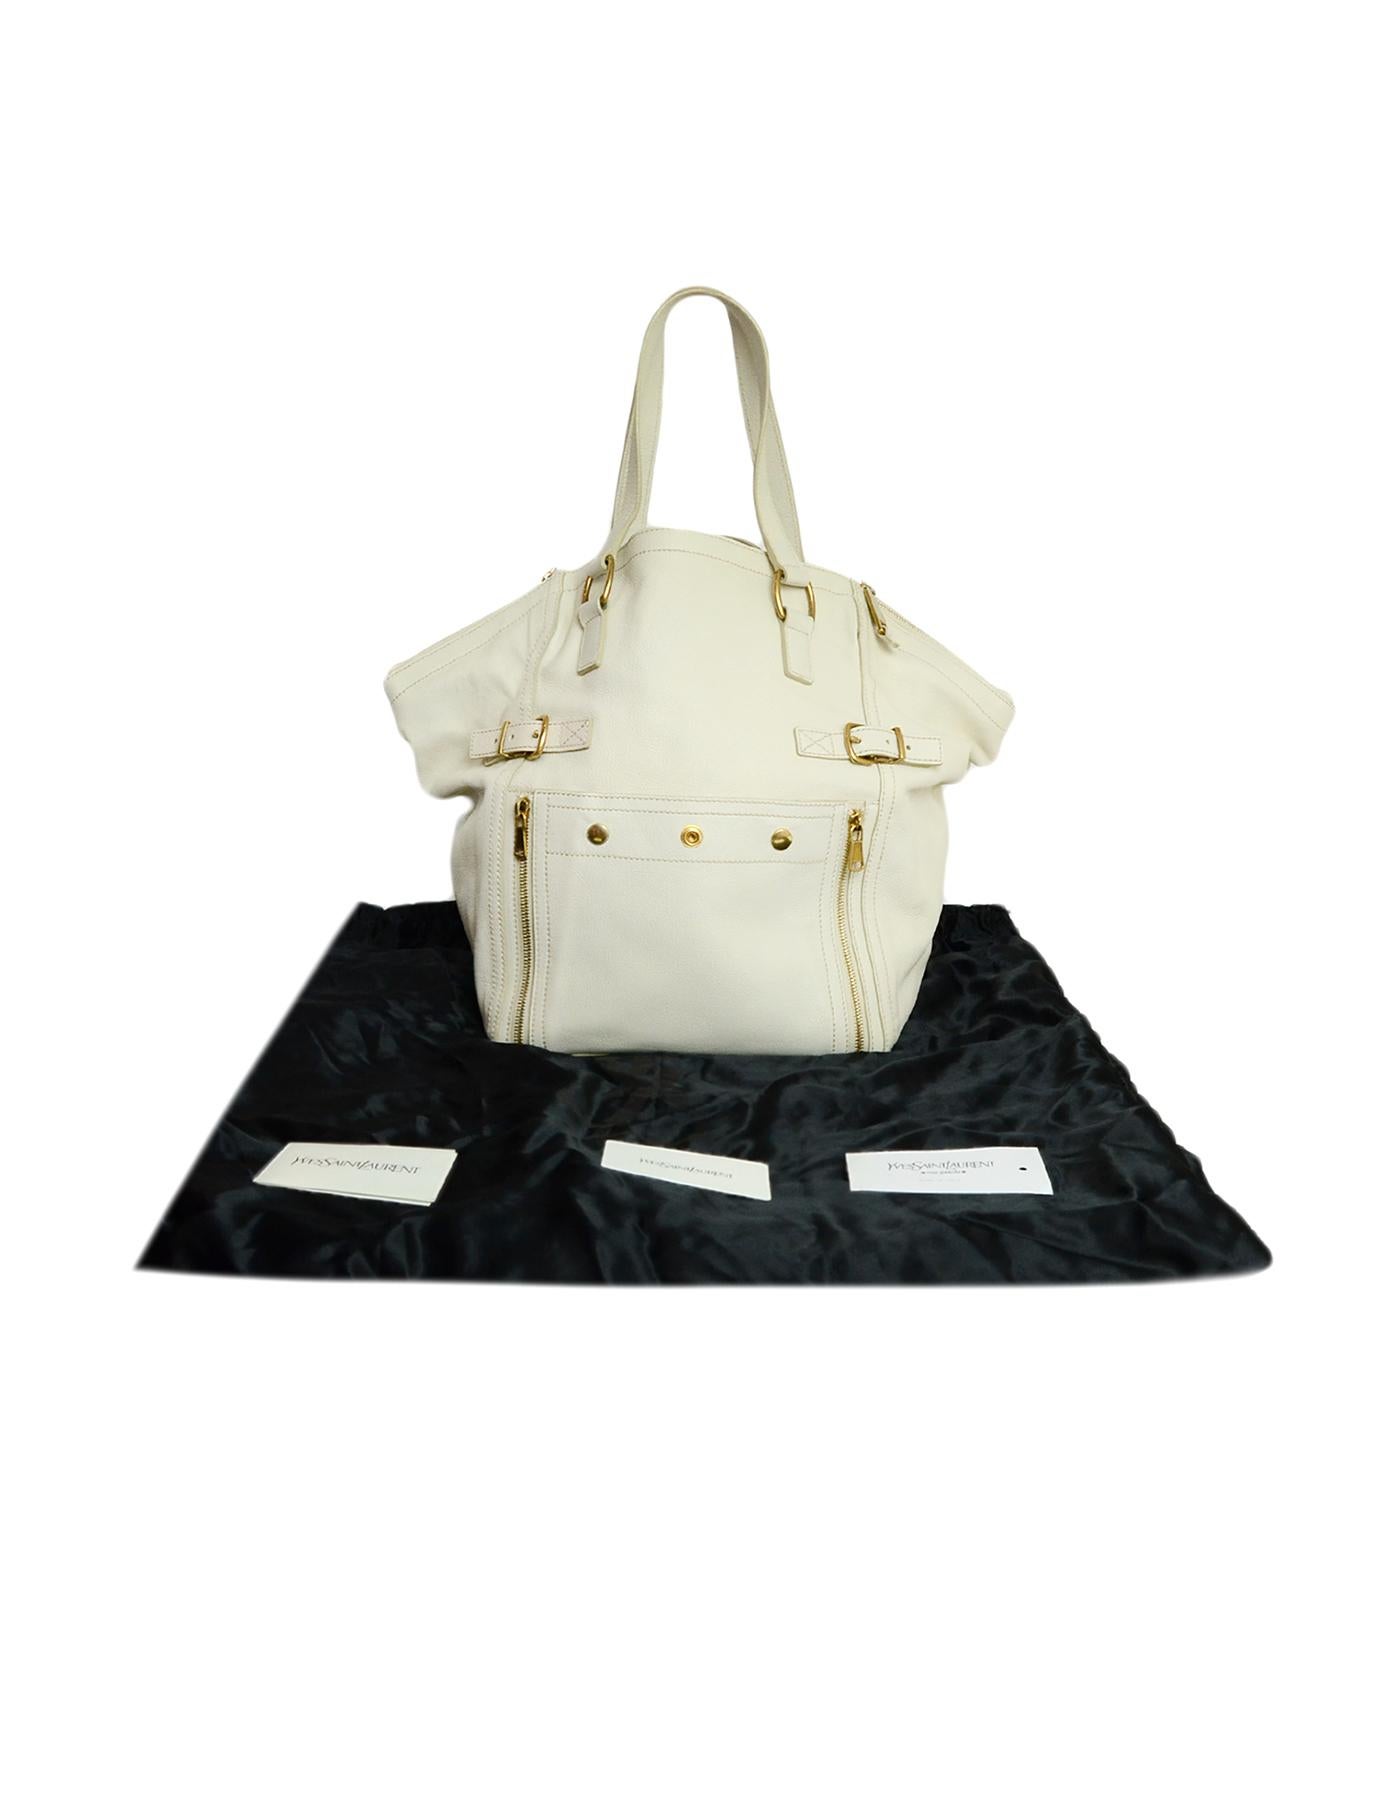 Yves Saint Laurent Ivory Leather Large Downtown Tote Bag rt $1, 795 7